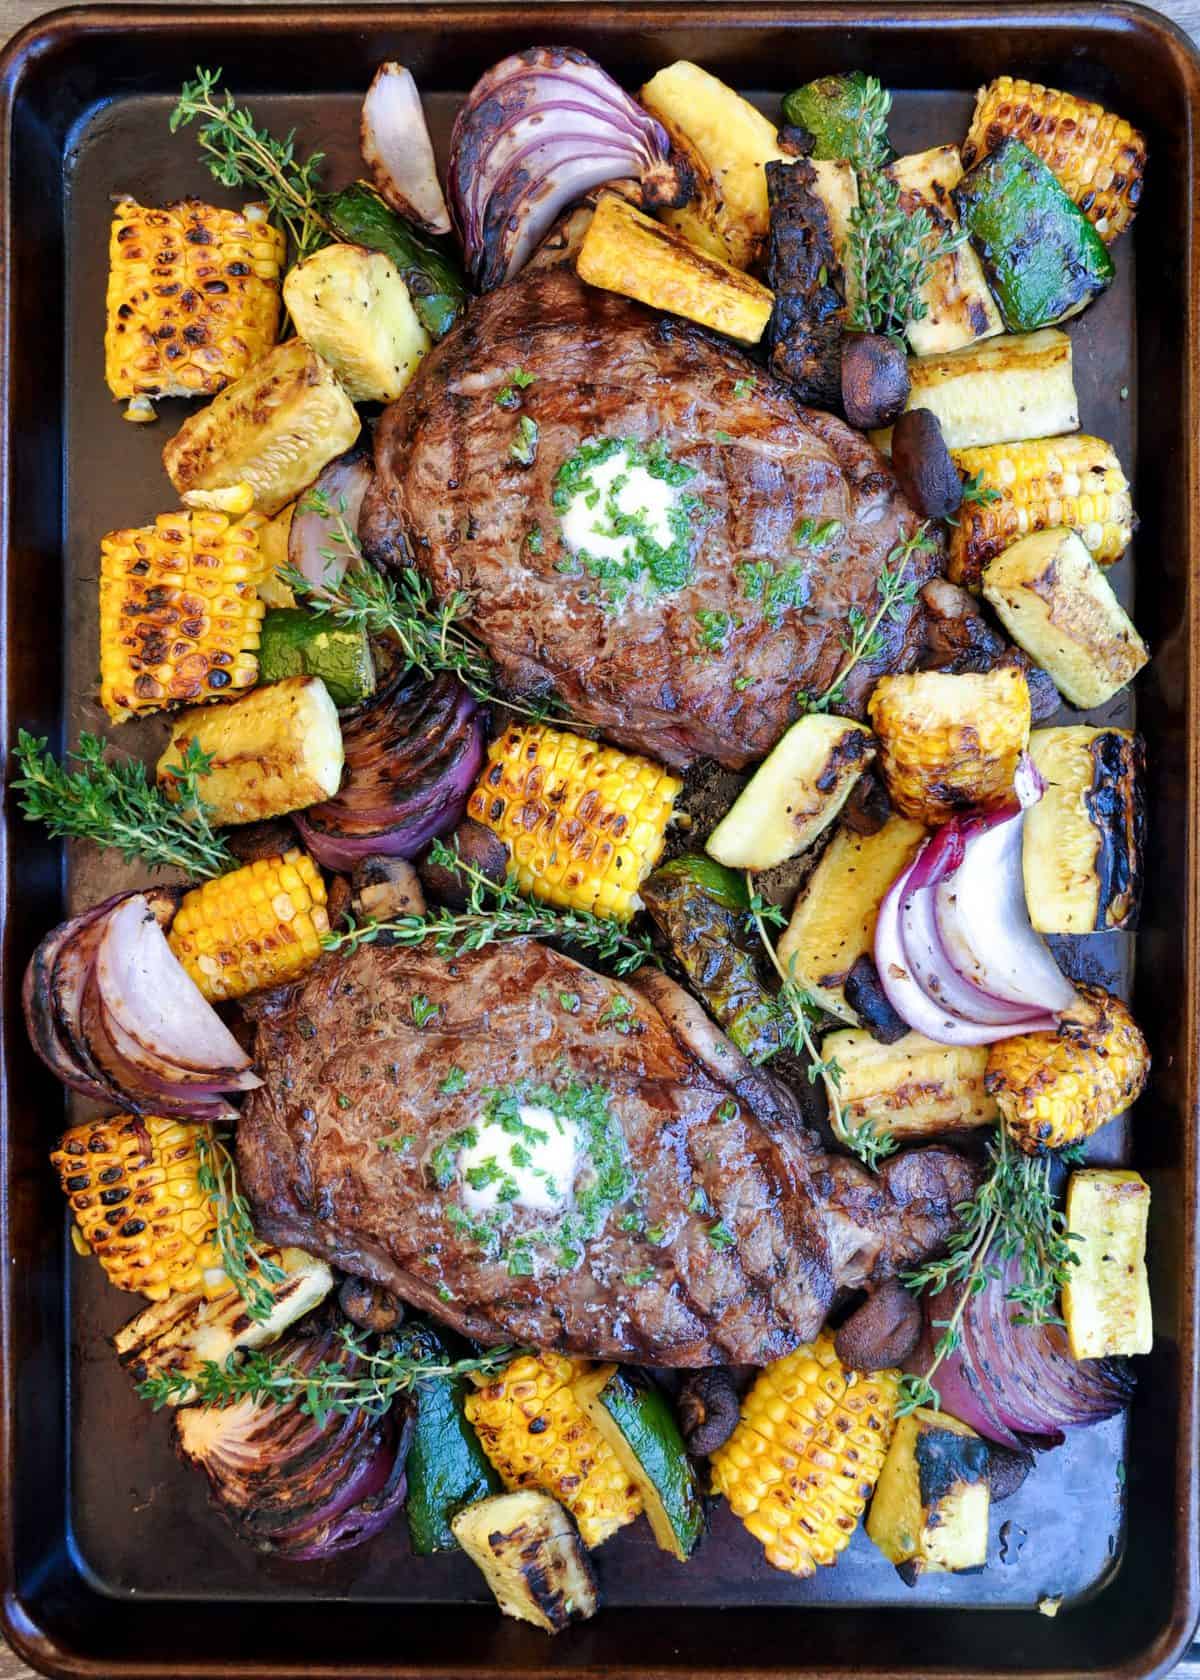 Easy Wine Marinated Steak Recipe with California Olive Oil, Fresh Herbs and Grilled Vegetables